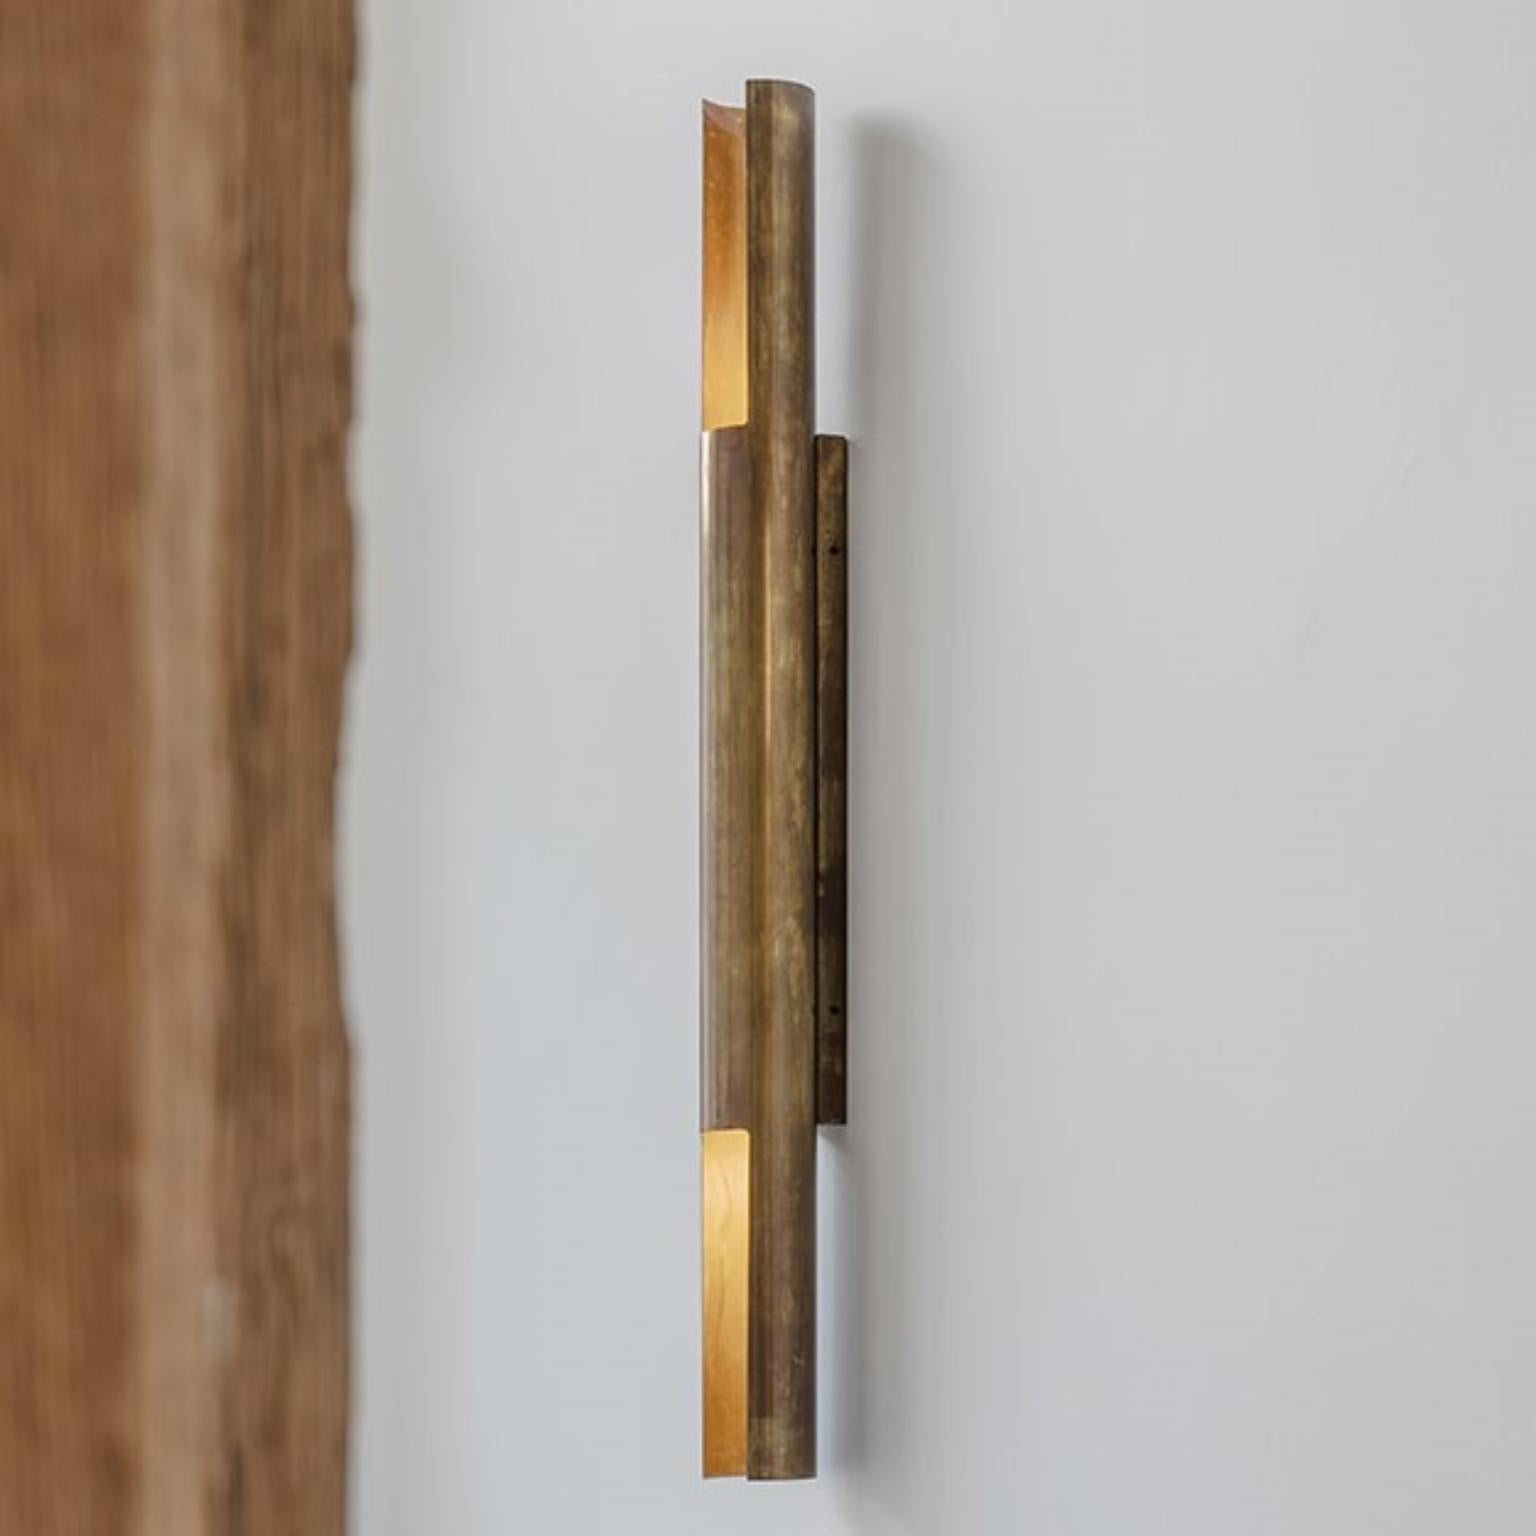 Unique Ferry wall lamp by Koen Van Guijze
Dimensions: 10 D x 120 H cm
Materials: Brass

Light inside a brutalist brass tube.

After a career of more than 25 years in the lighting business as a lighting architect, Koen van Guijze decided to